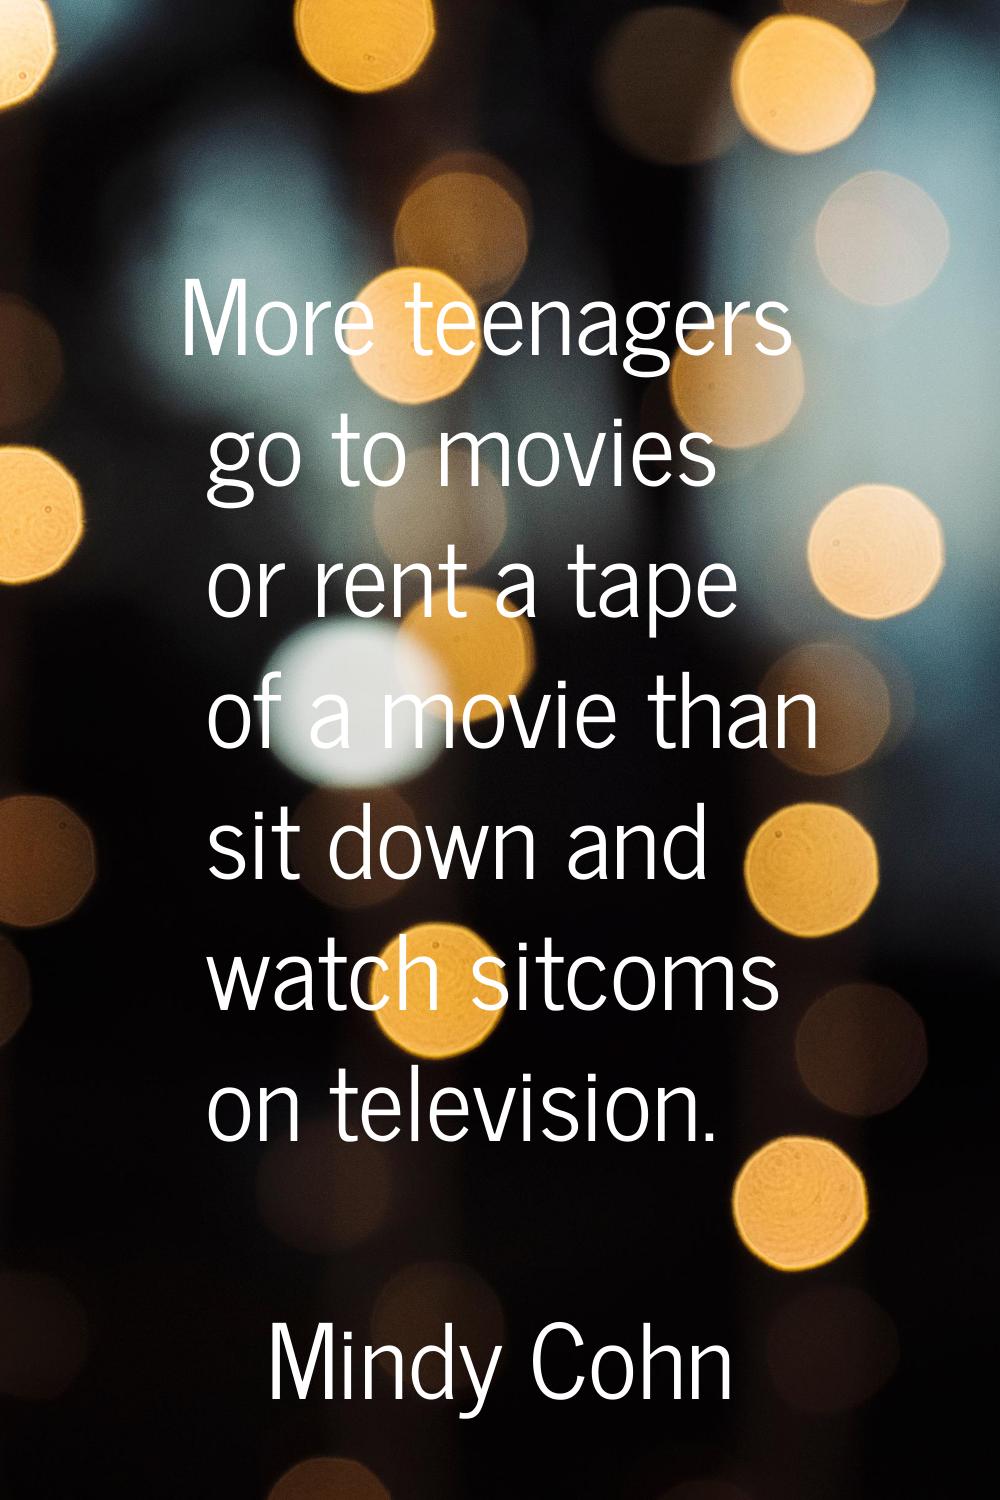 More teenagers go to movies or rent a tape of a movie than sit down and watch sitcoms on television